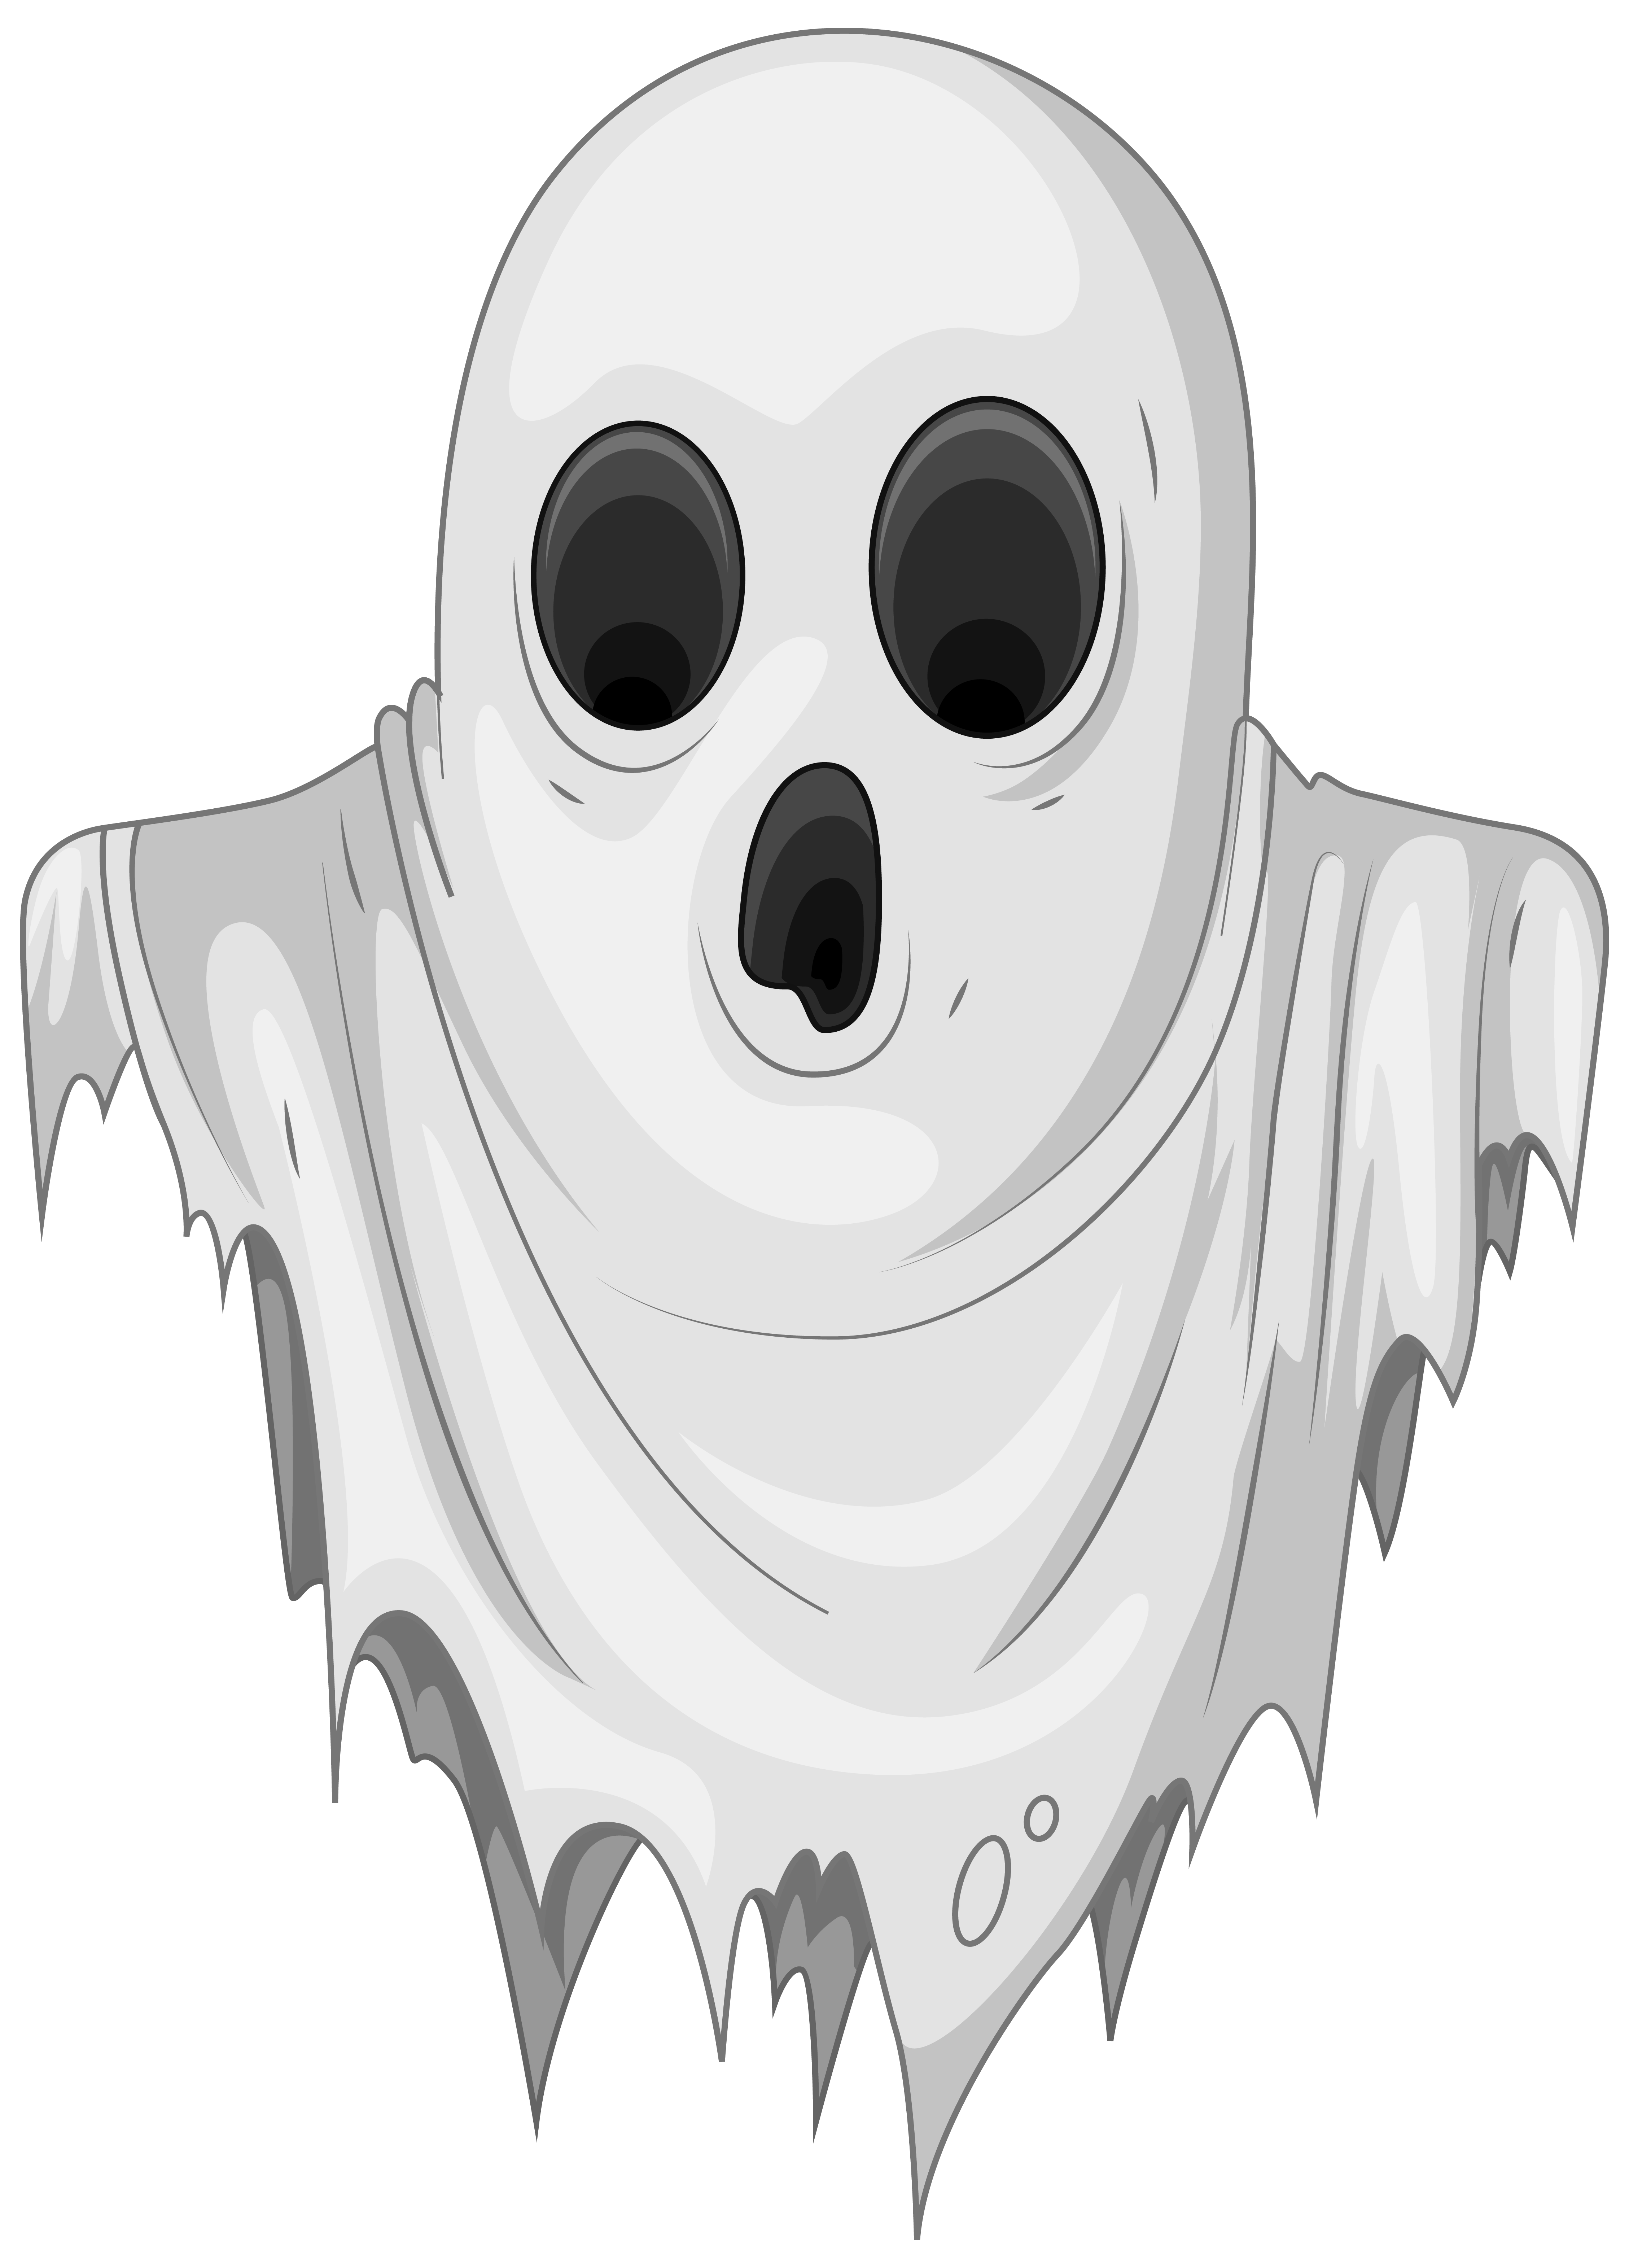 Ghost Clip art Haunted Ghost PNG Clipart Image png download 4515*